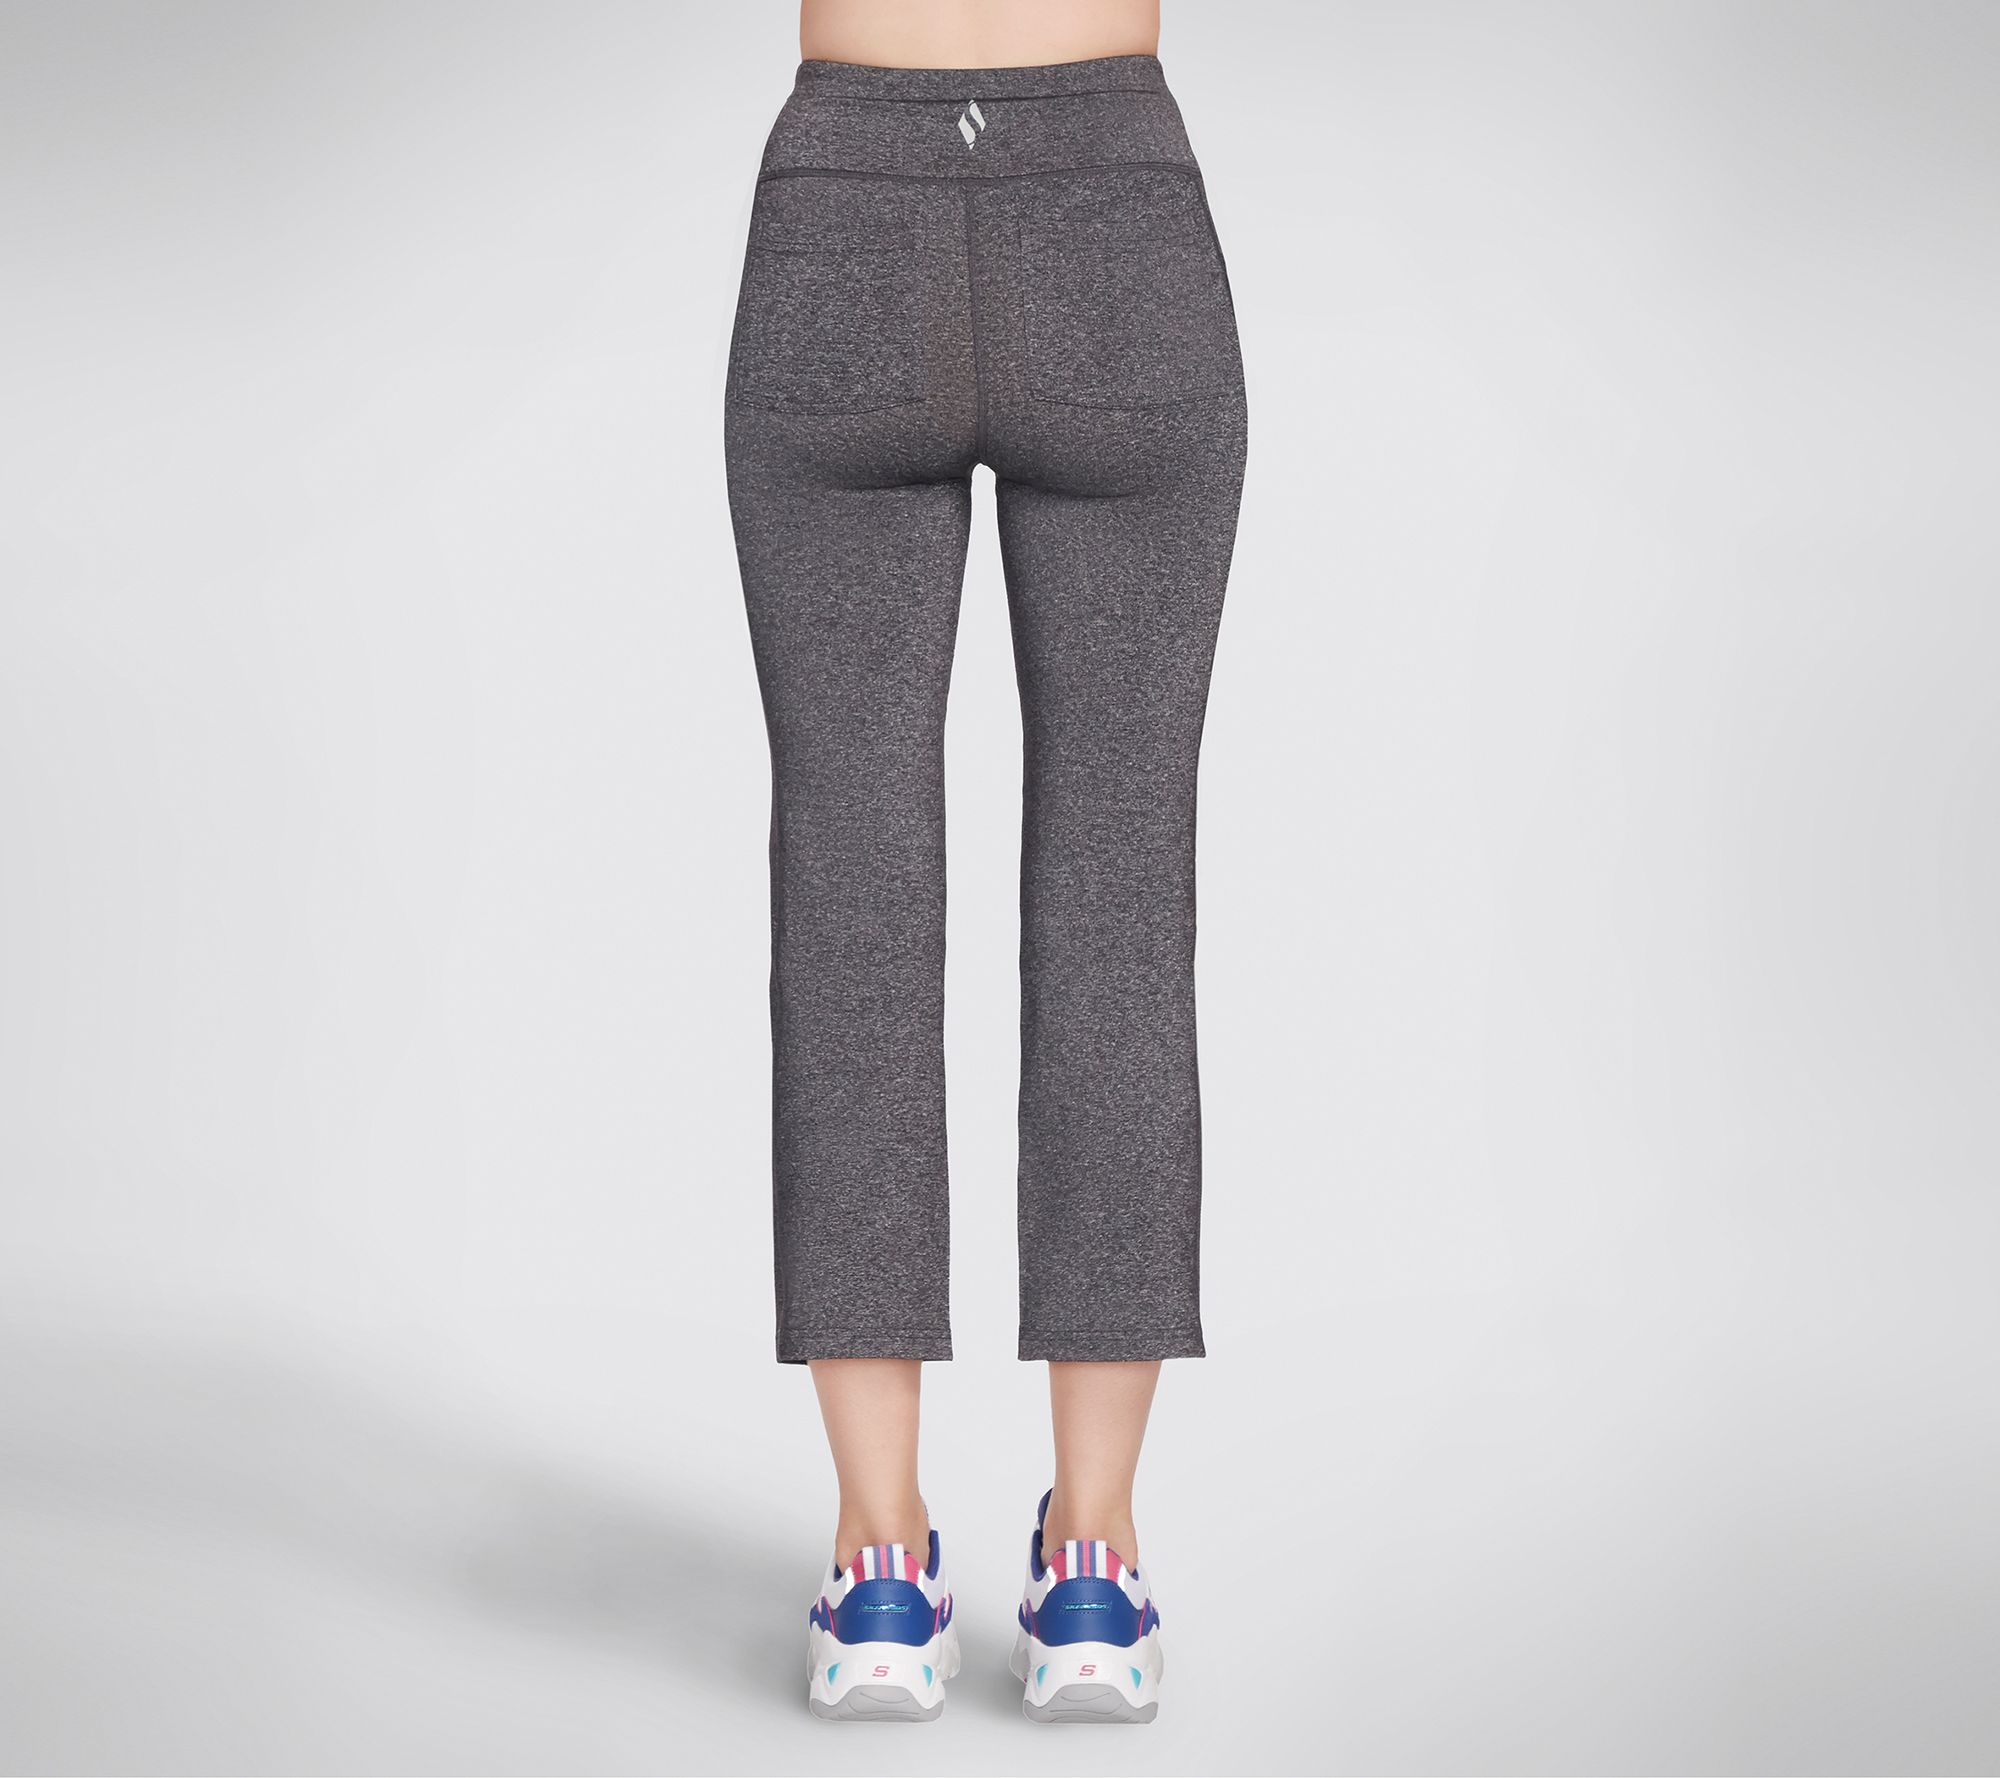 Health & Fitness - Activewear - Bottoms - Skechers Apparel Go Flex Walk Pant  - Online Shopping for Canadians